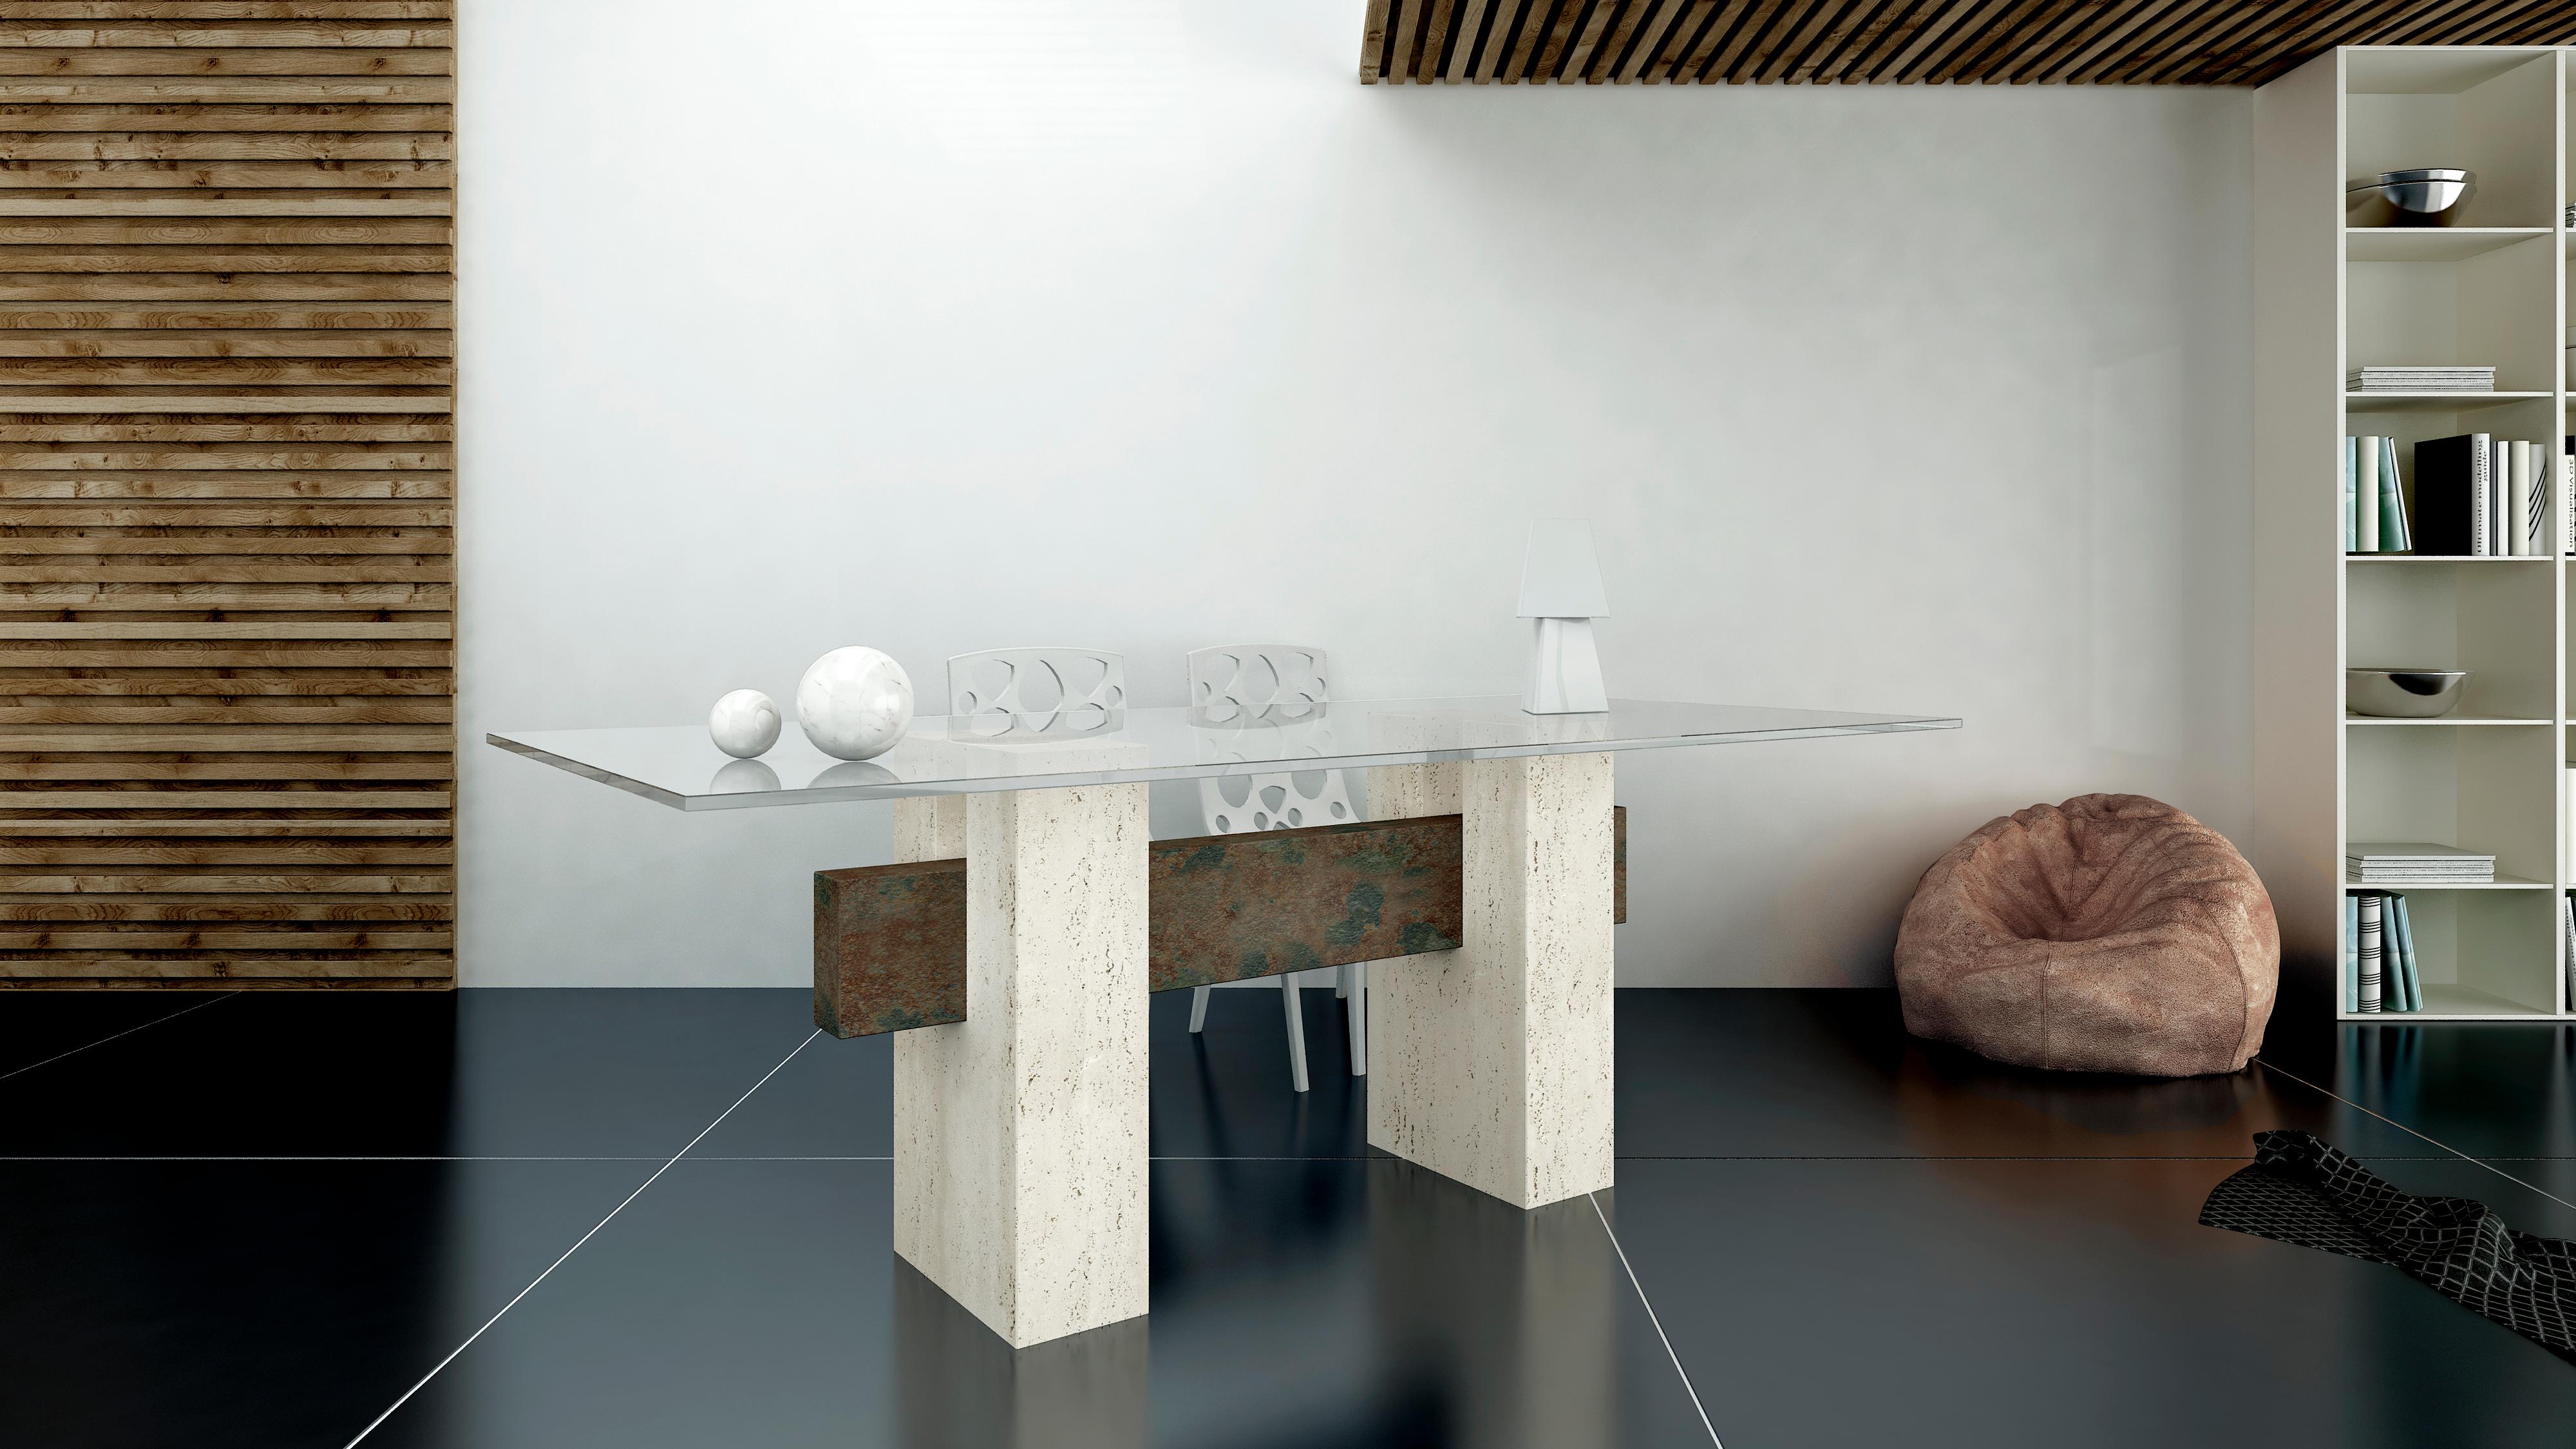 The Tapies dining table in natural travertine marble is an exclusive design by Joaquín Moll for Meddel Archivo Collection.
Marble table design, contemporary style, made of Roman travertine marble combined with oxide slate and glass top.
The table is